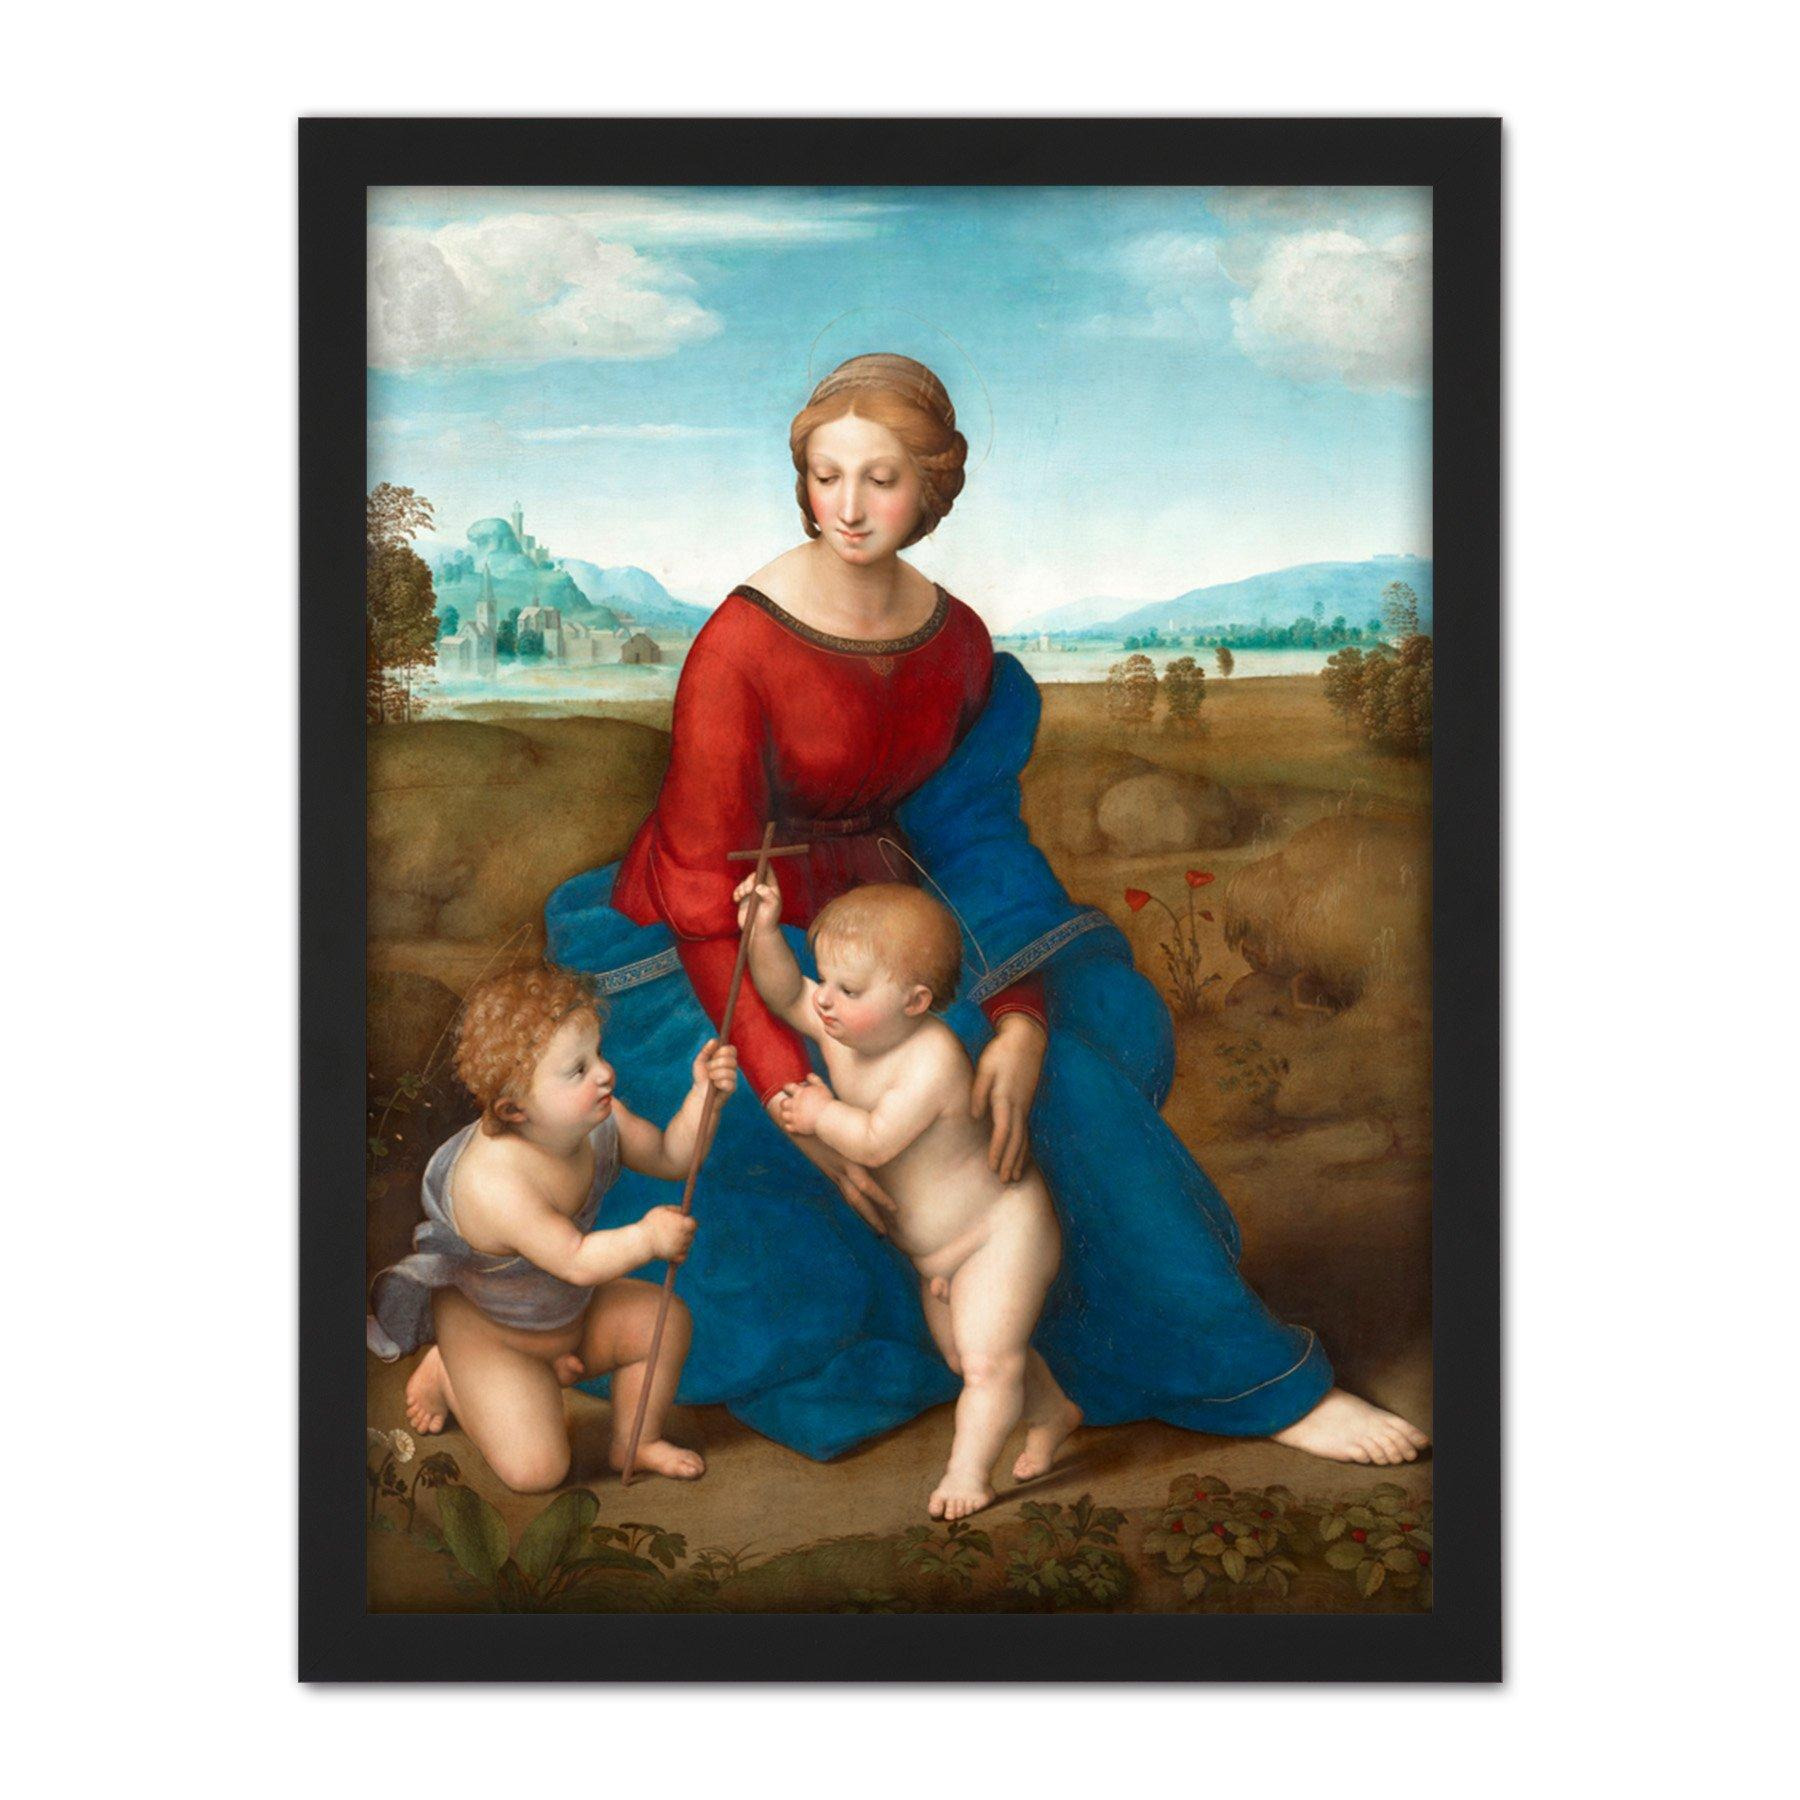 Raphael Madonna In The Meadow Large Framed Wall Décor Art Print - image 1